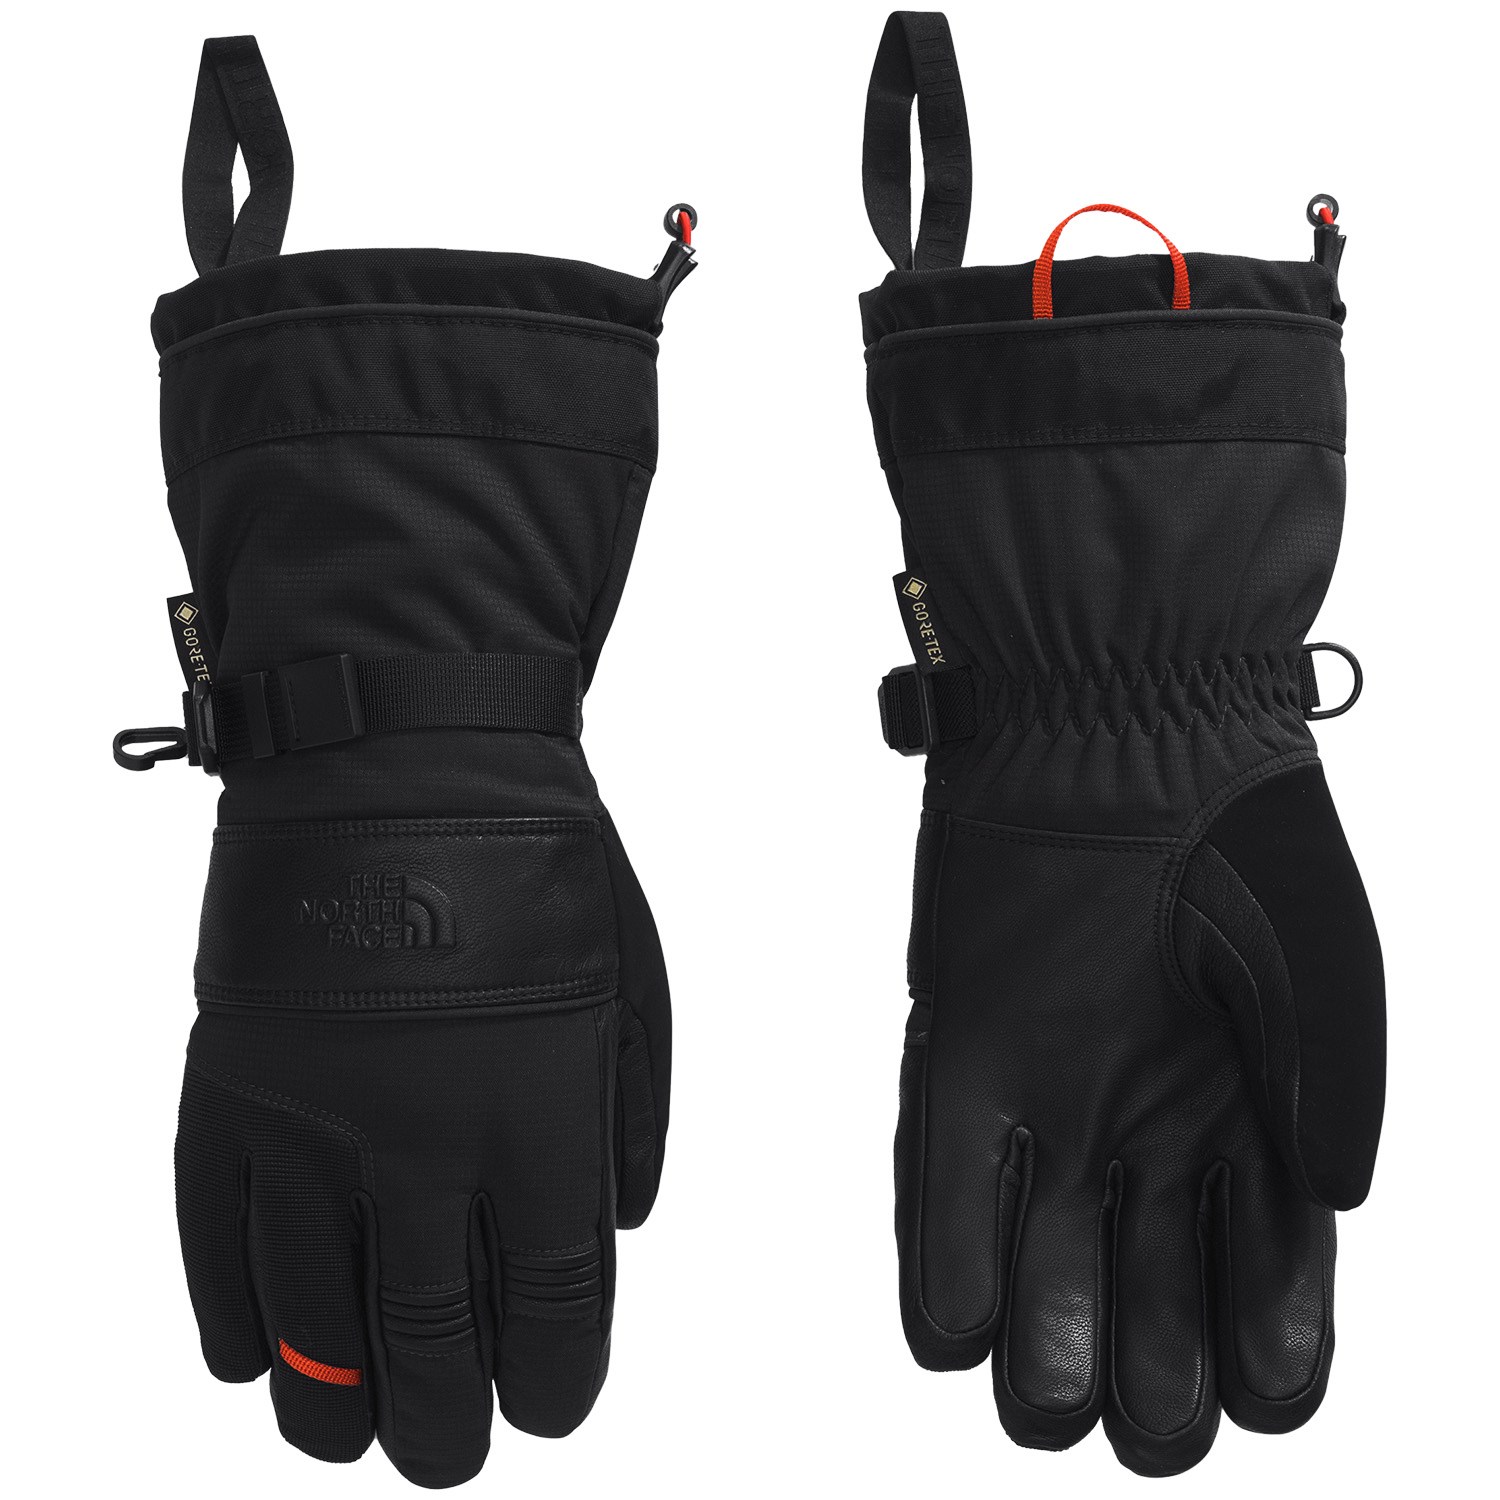 https://images.evo.com/imgp/zoom/238875/1073363/the-north-face-montana-pro-gtx-gloves-.jpg